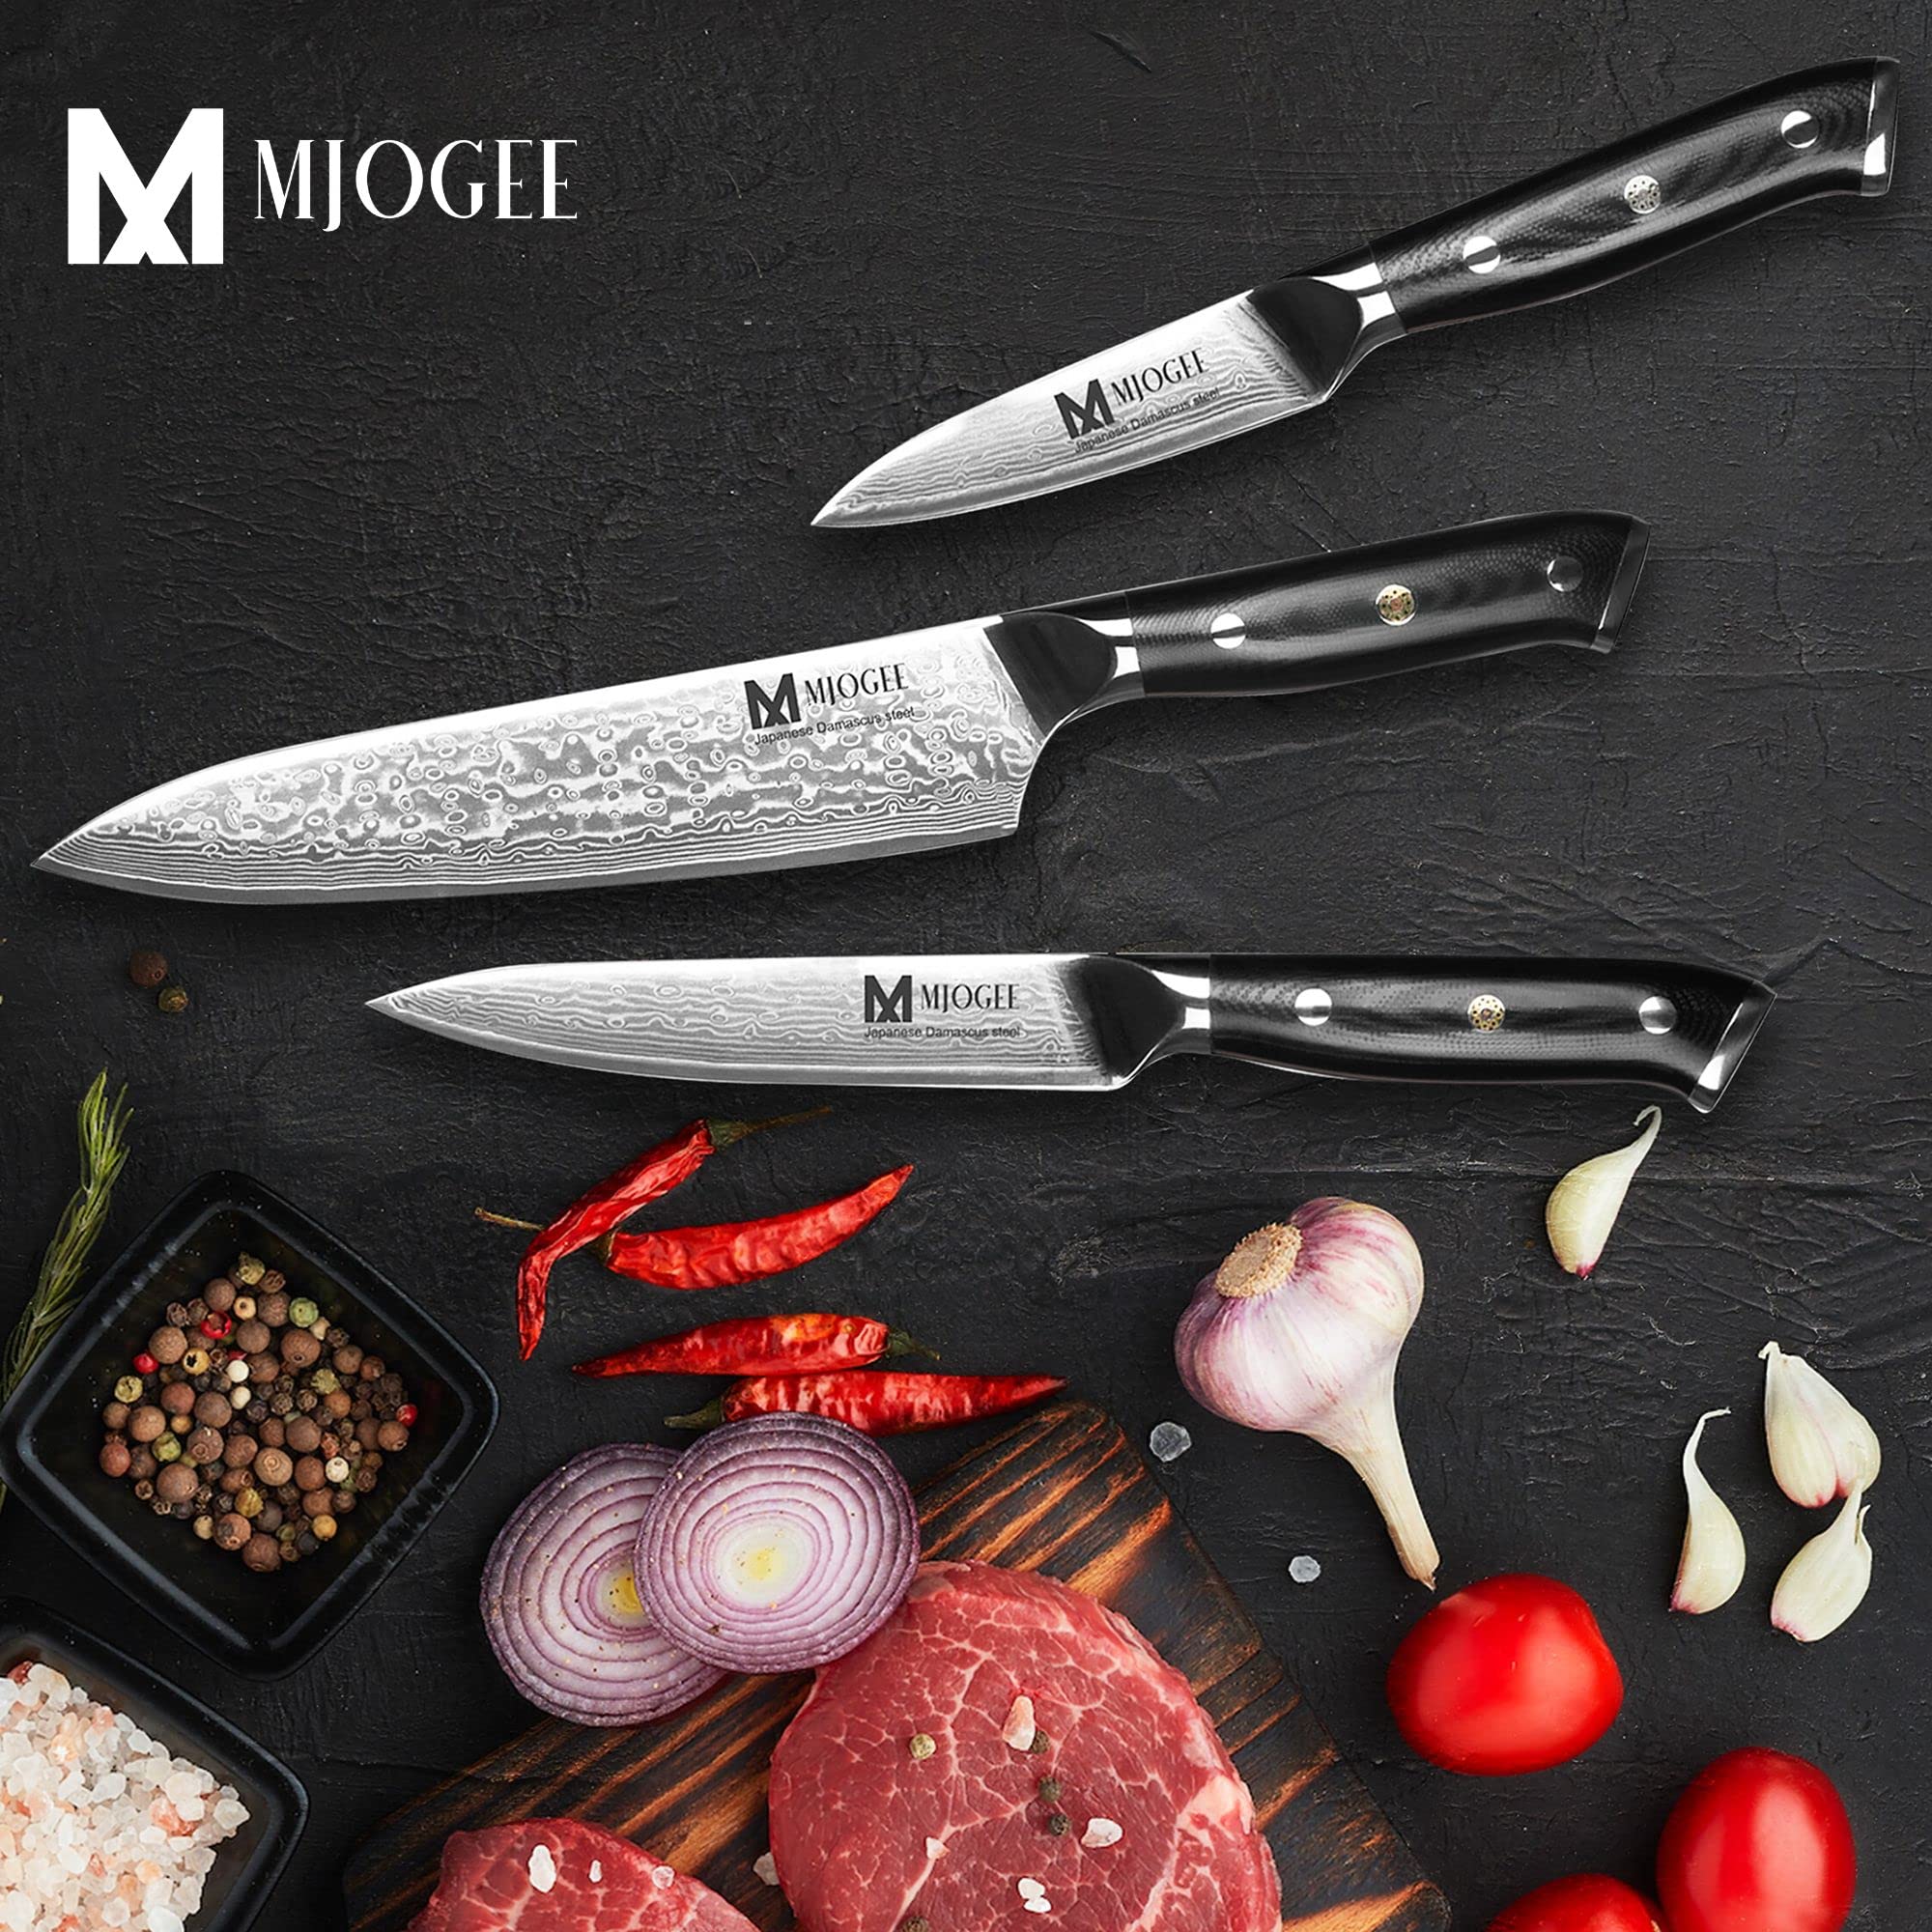 MJOGEE Damascus Professional Kitchen Knives - Chef Knife Set of 3 - Professional Knife Sets for Chefs - Carbon Steel Chef's Knives - 8-Inch Chef Knife, 5-Inch Utility Knife, & 3.5-Inch Paring Knife